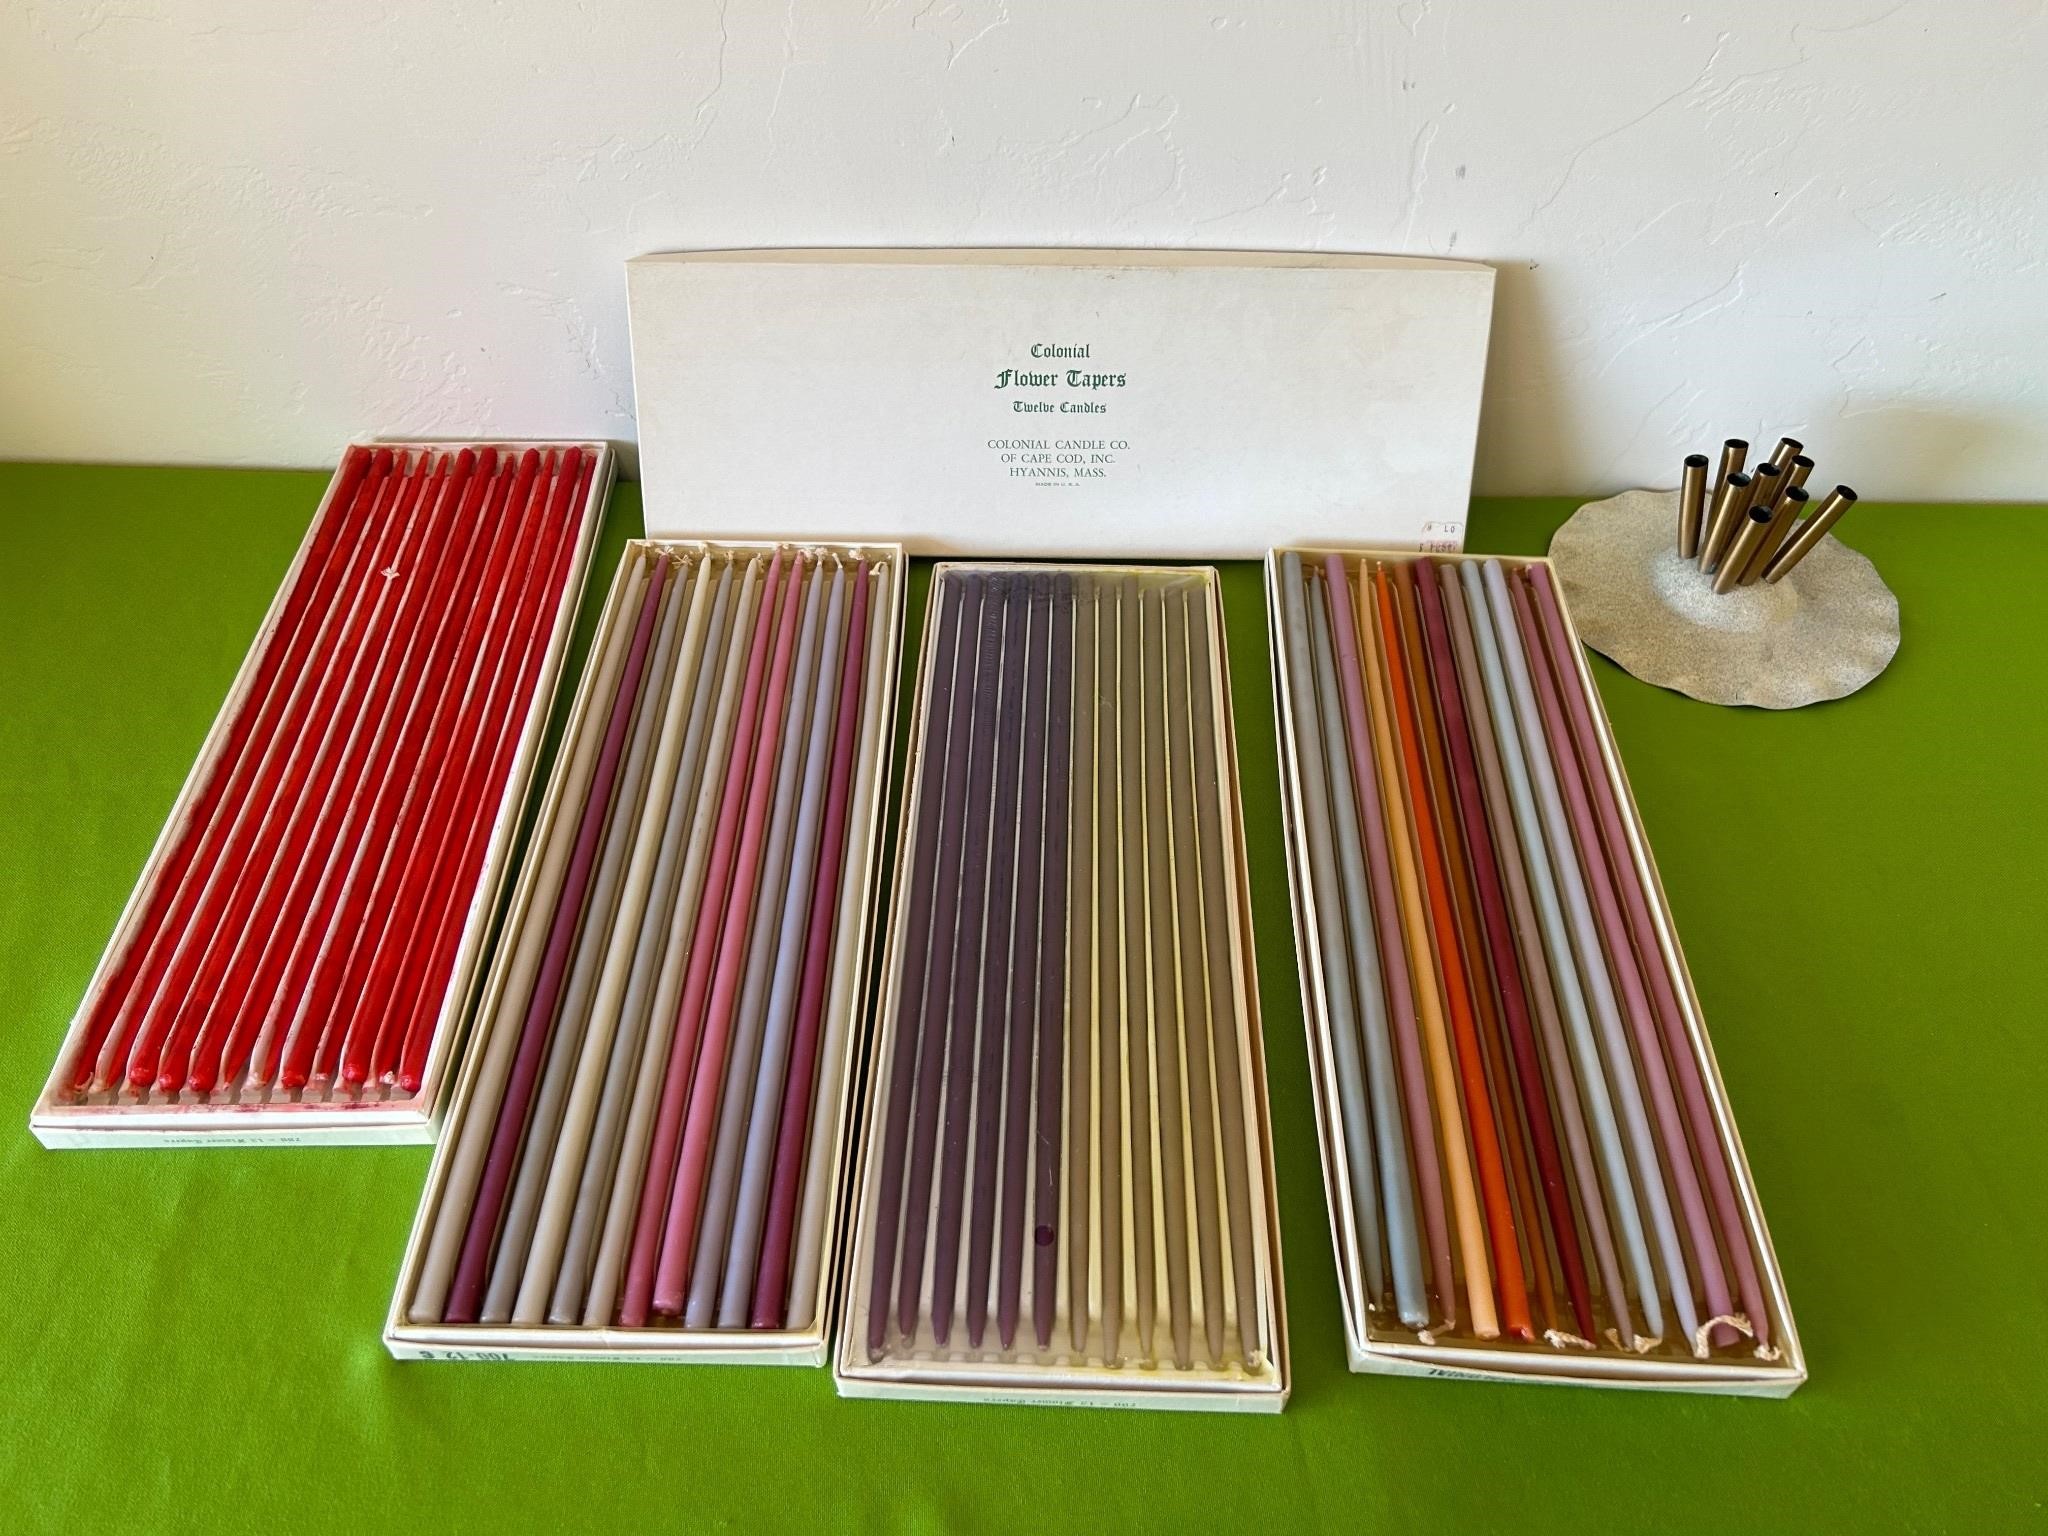 5 Boxes of Colonial Flower Taper Candles